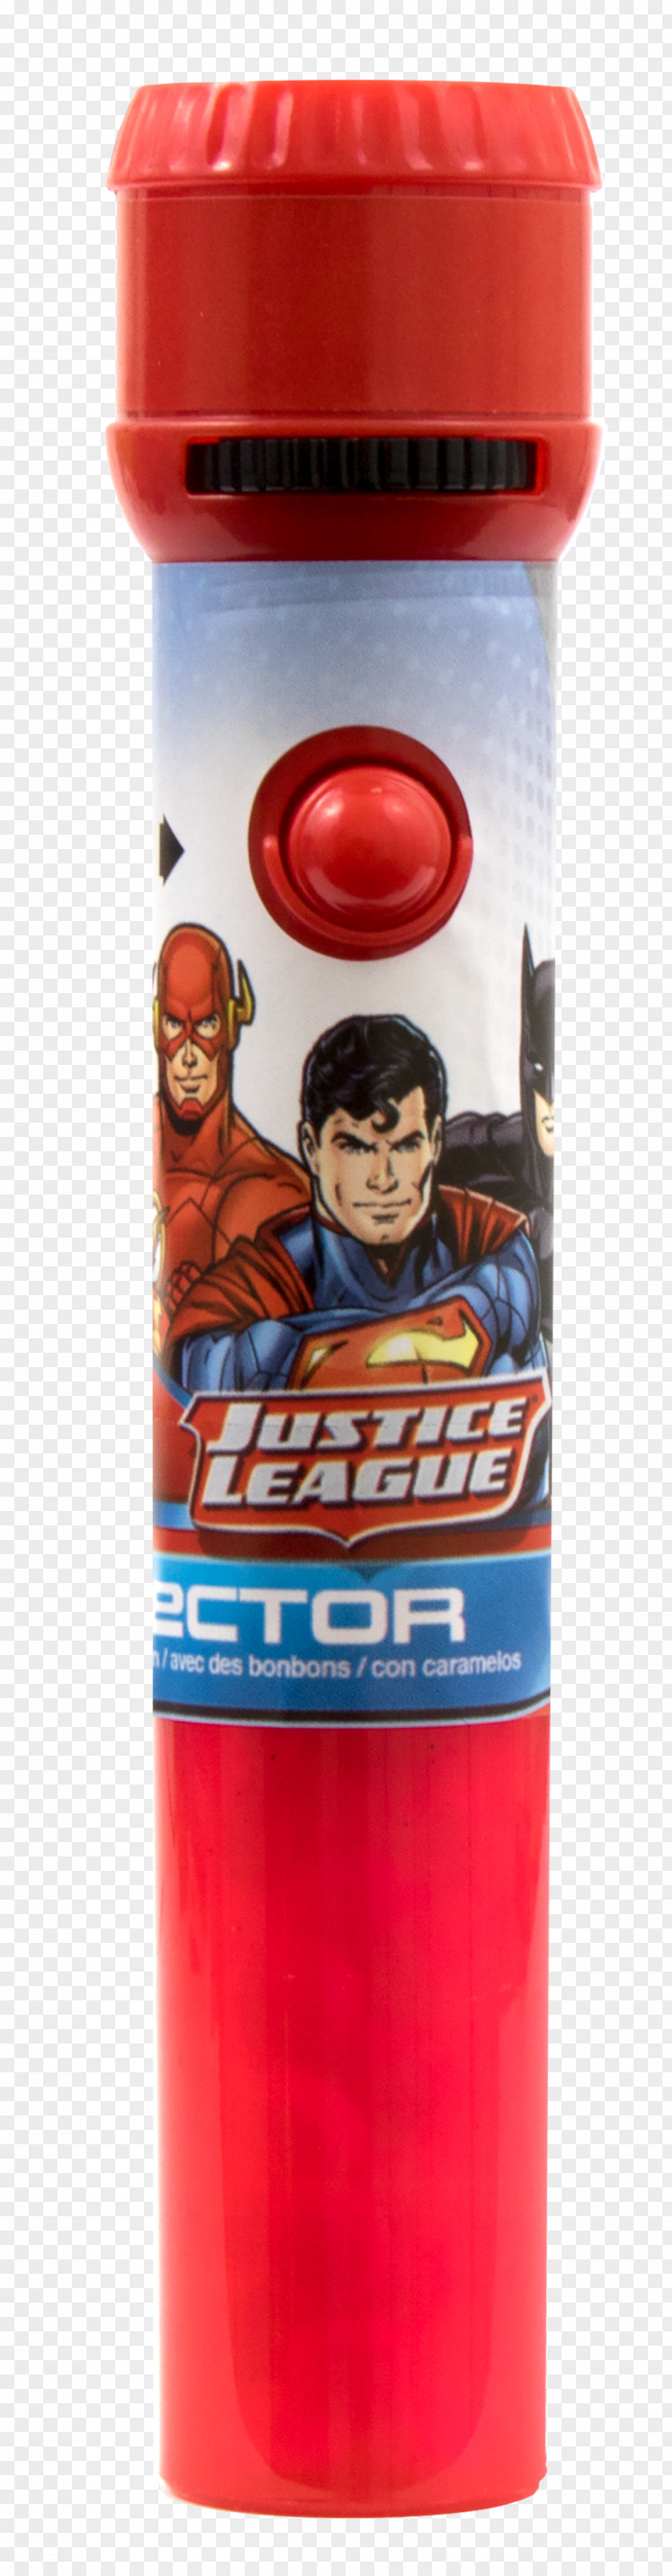 Orange Justice League Projector BIP Holland B.V. Candy PNG